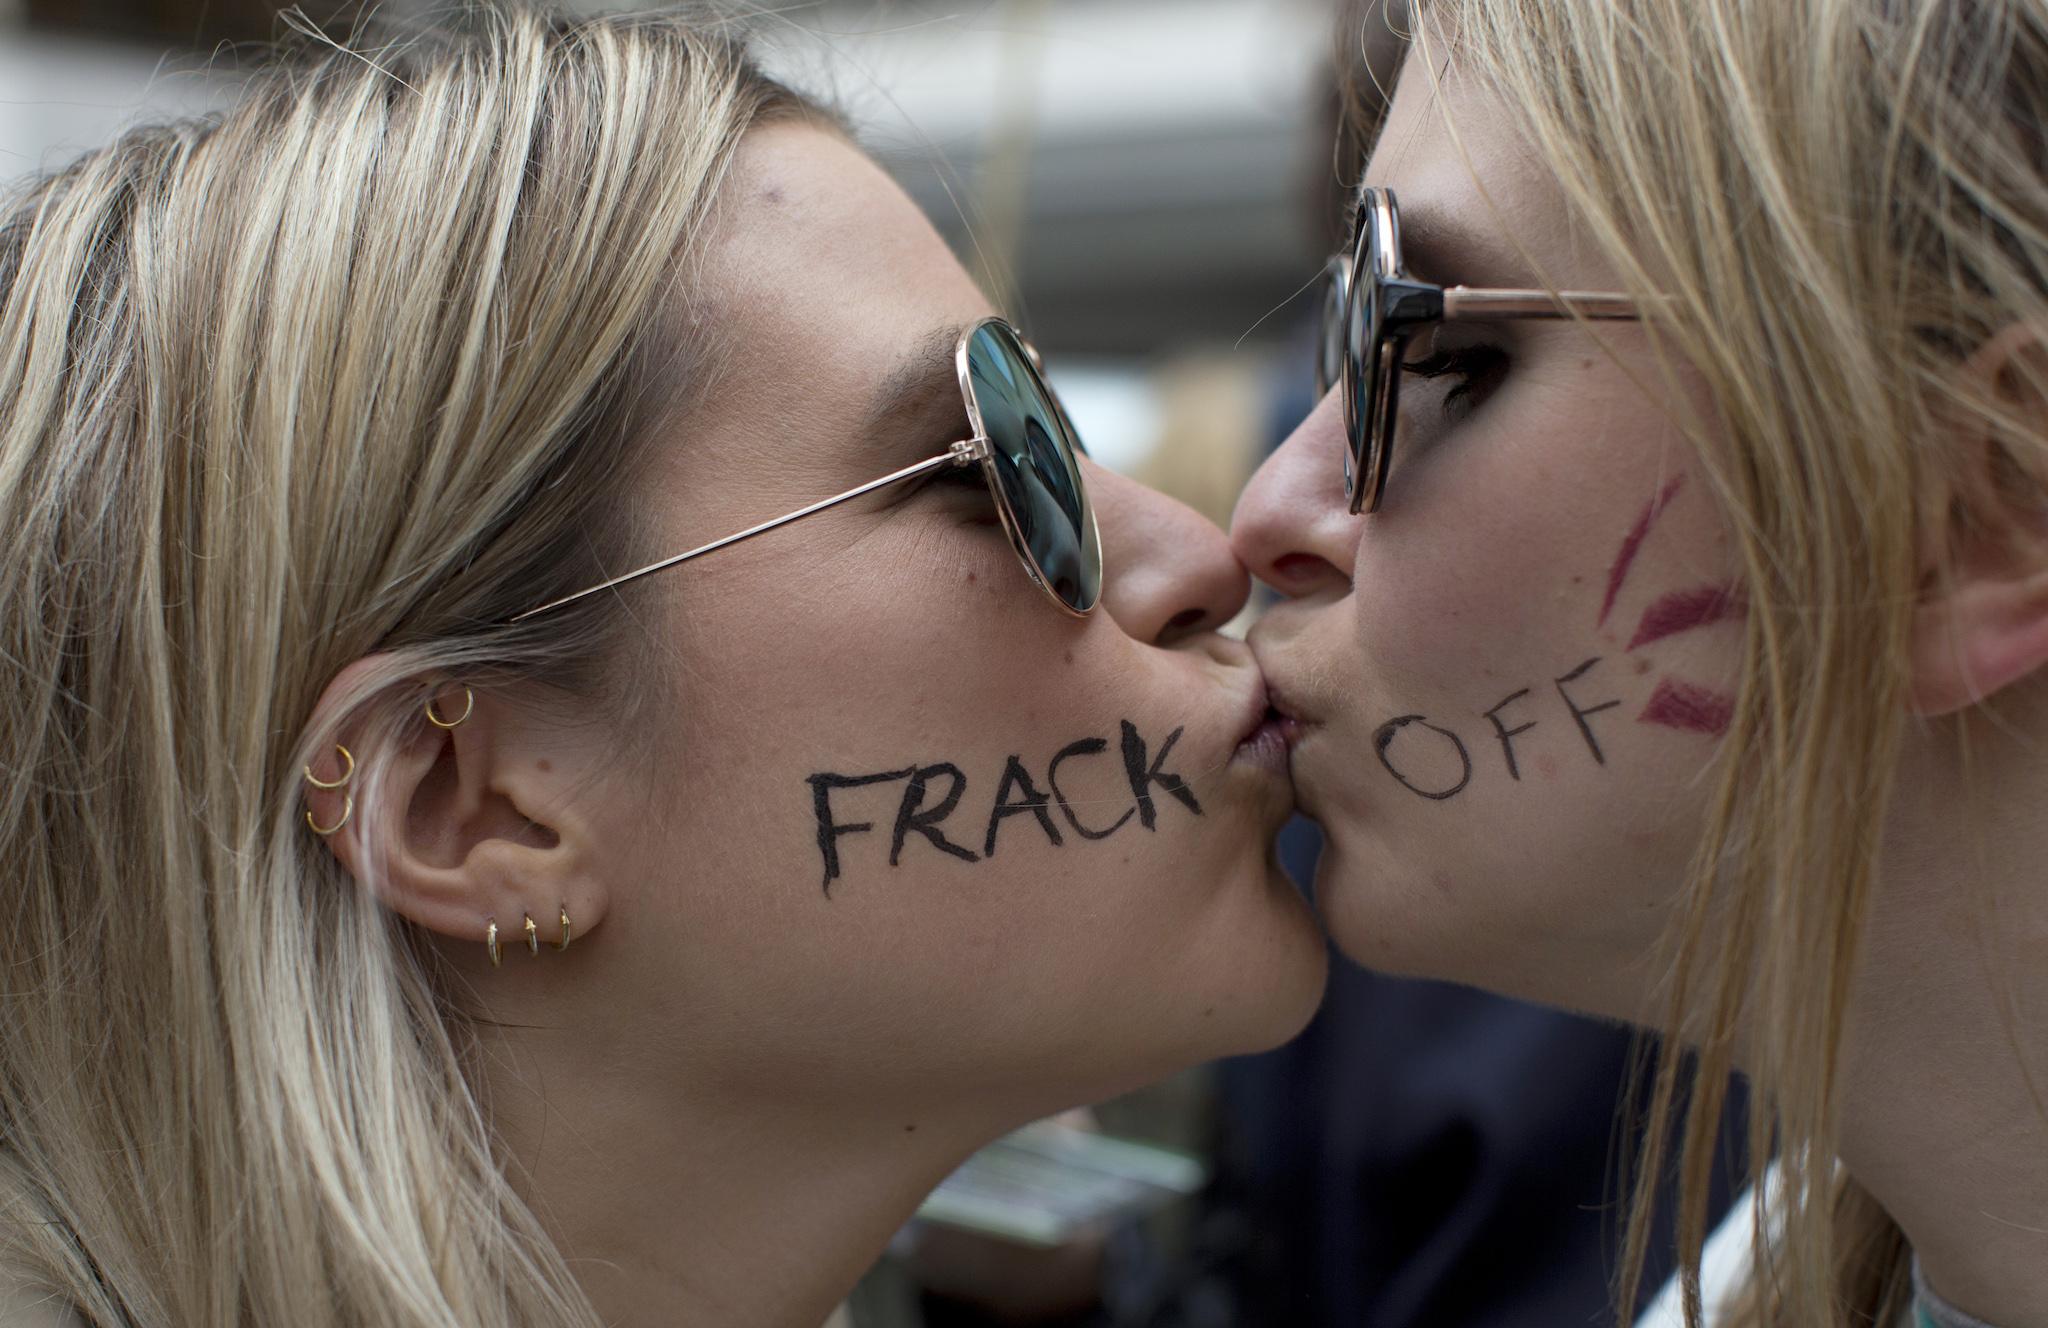 Two demonstrators kiss as they pose for a photograph during an anti-fracking protest in central London March 19, 2014